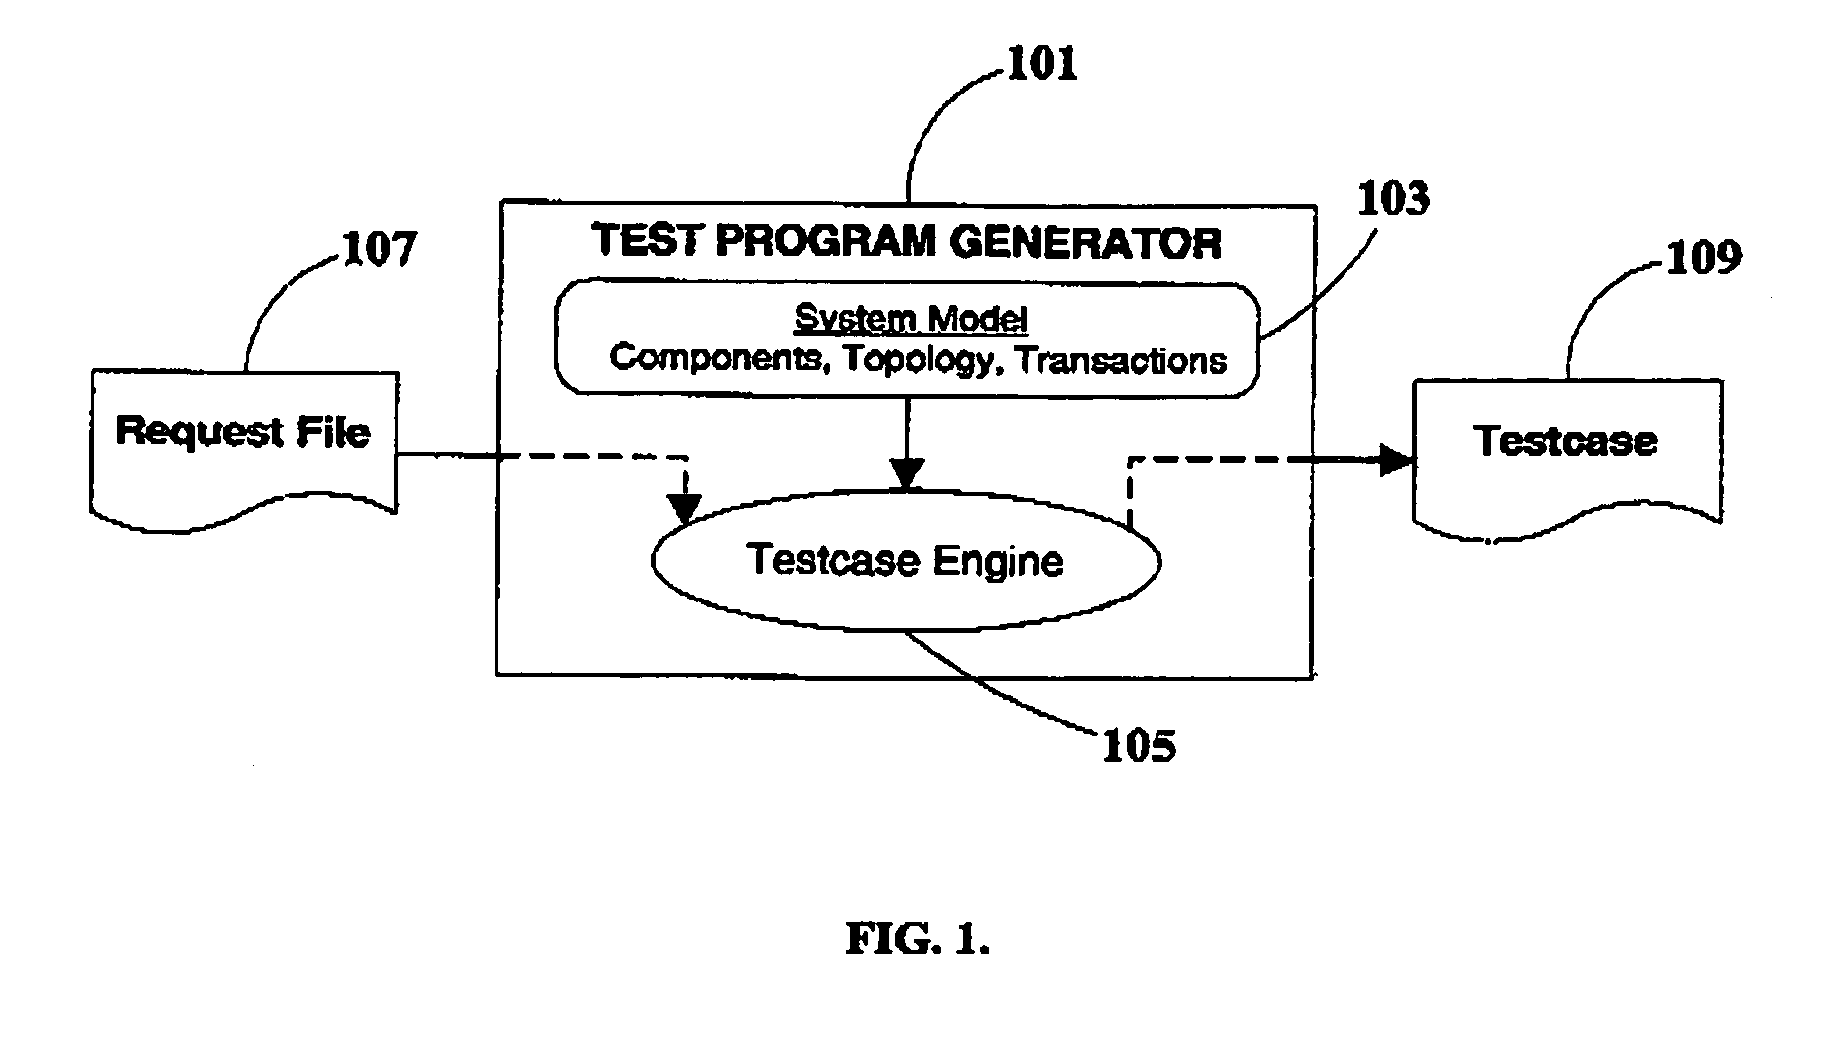 Scheduling of transactions in system-level test program generation